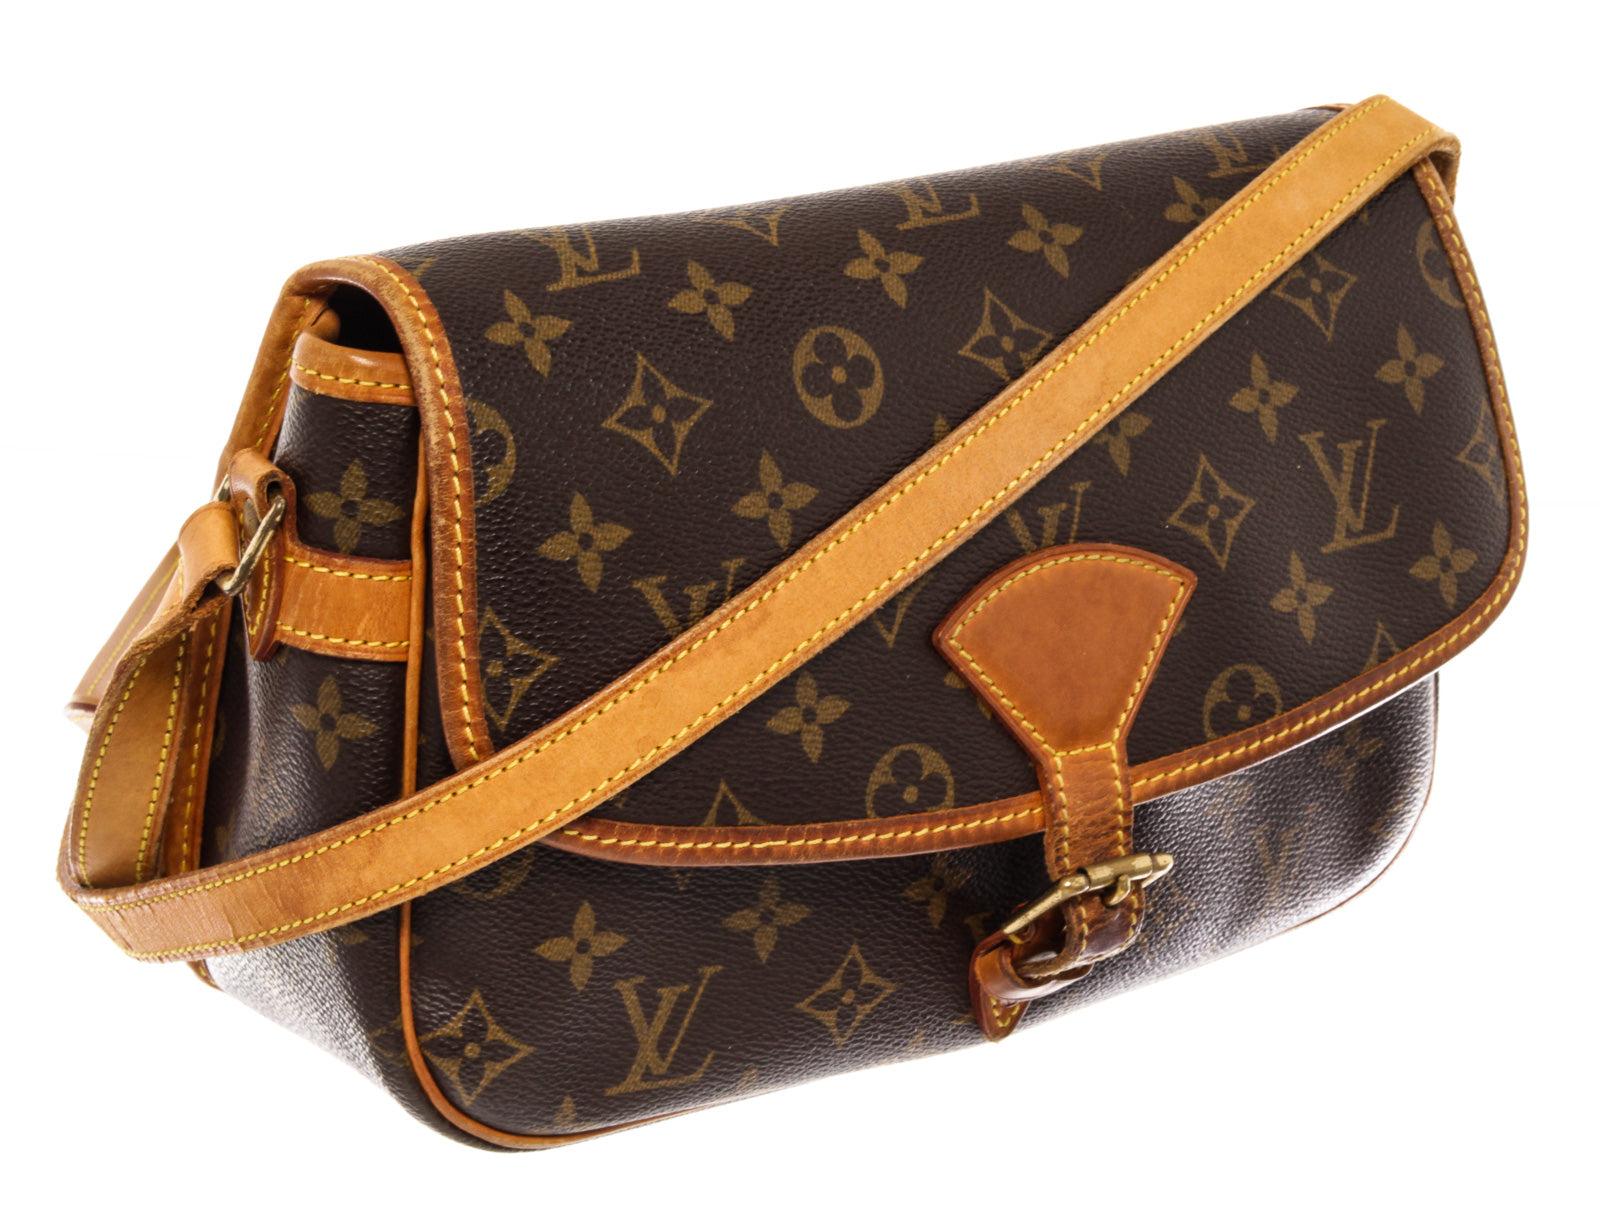 Brown and tan monogram coated canvas Louis Vuitton Sologne bag with brass hardware, tan vachetta leather trim, adjustable flat shoulder strap featuring shoulder pad, exterior slip pocket at back, single pocket at flap underside, brown canvas lining,